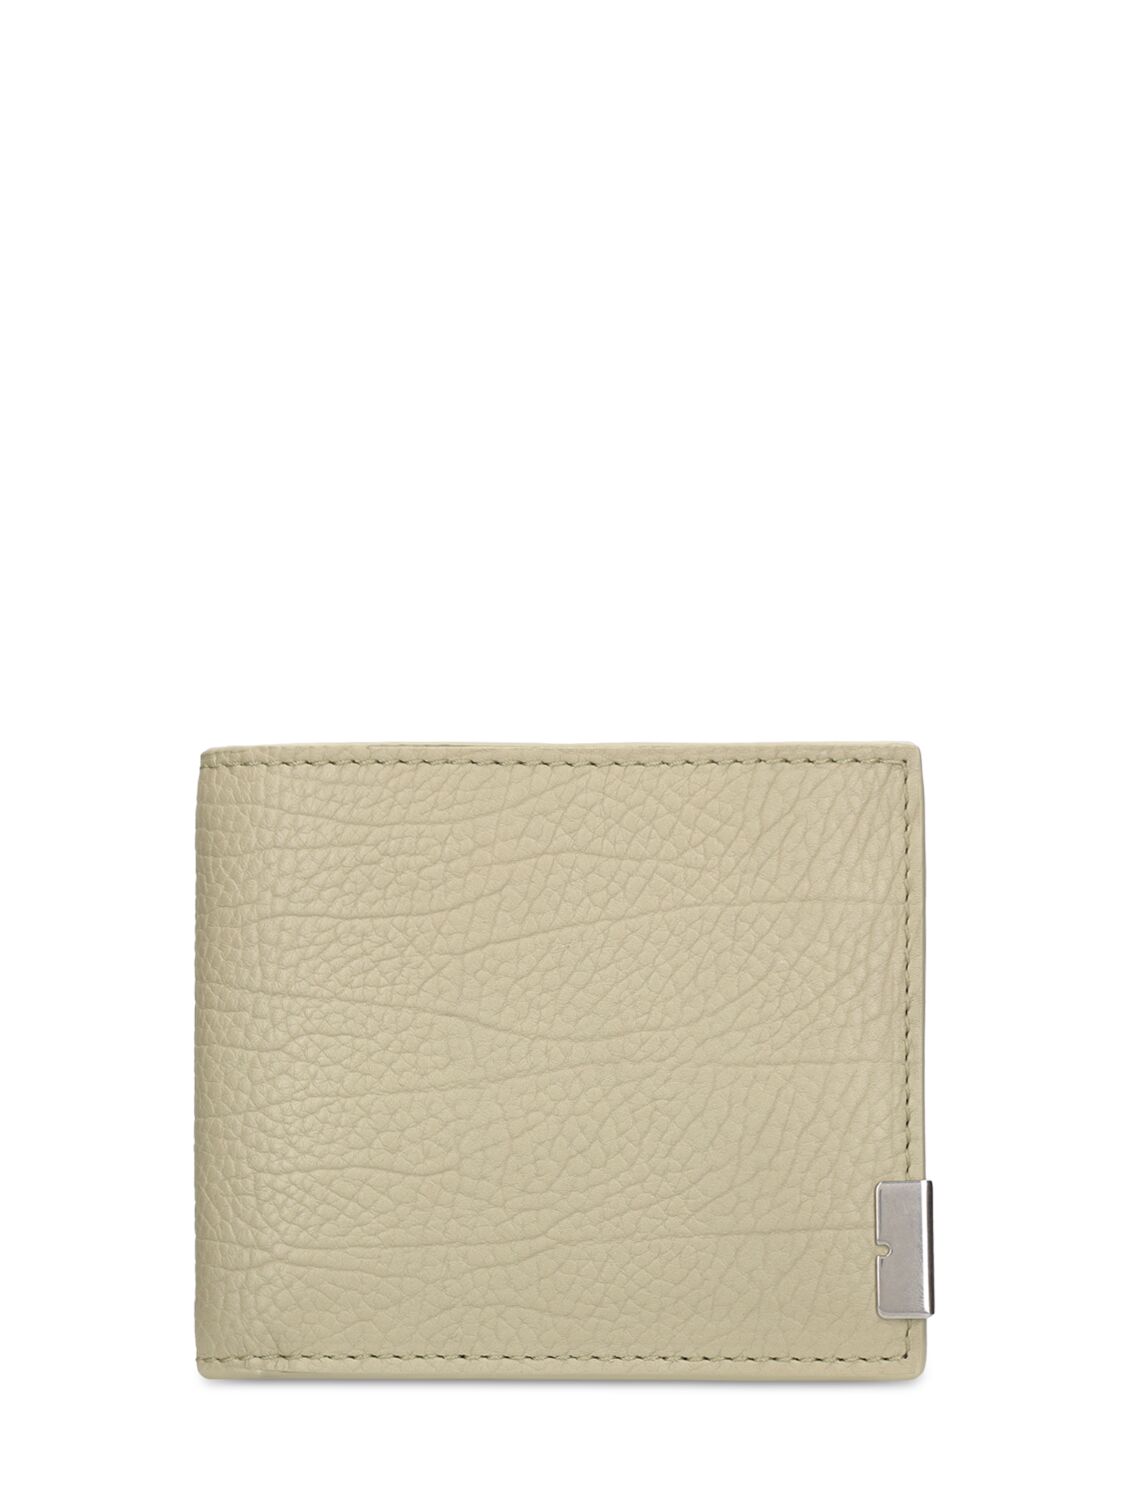 Burberry Grained Leather Bifold Wallet In Neutral